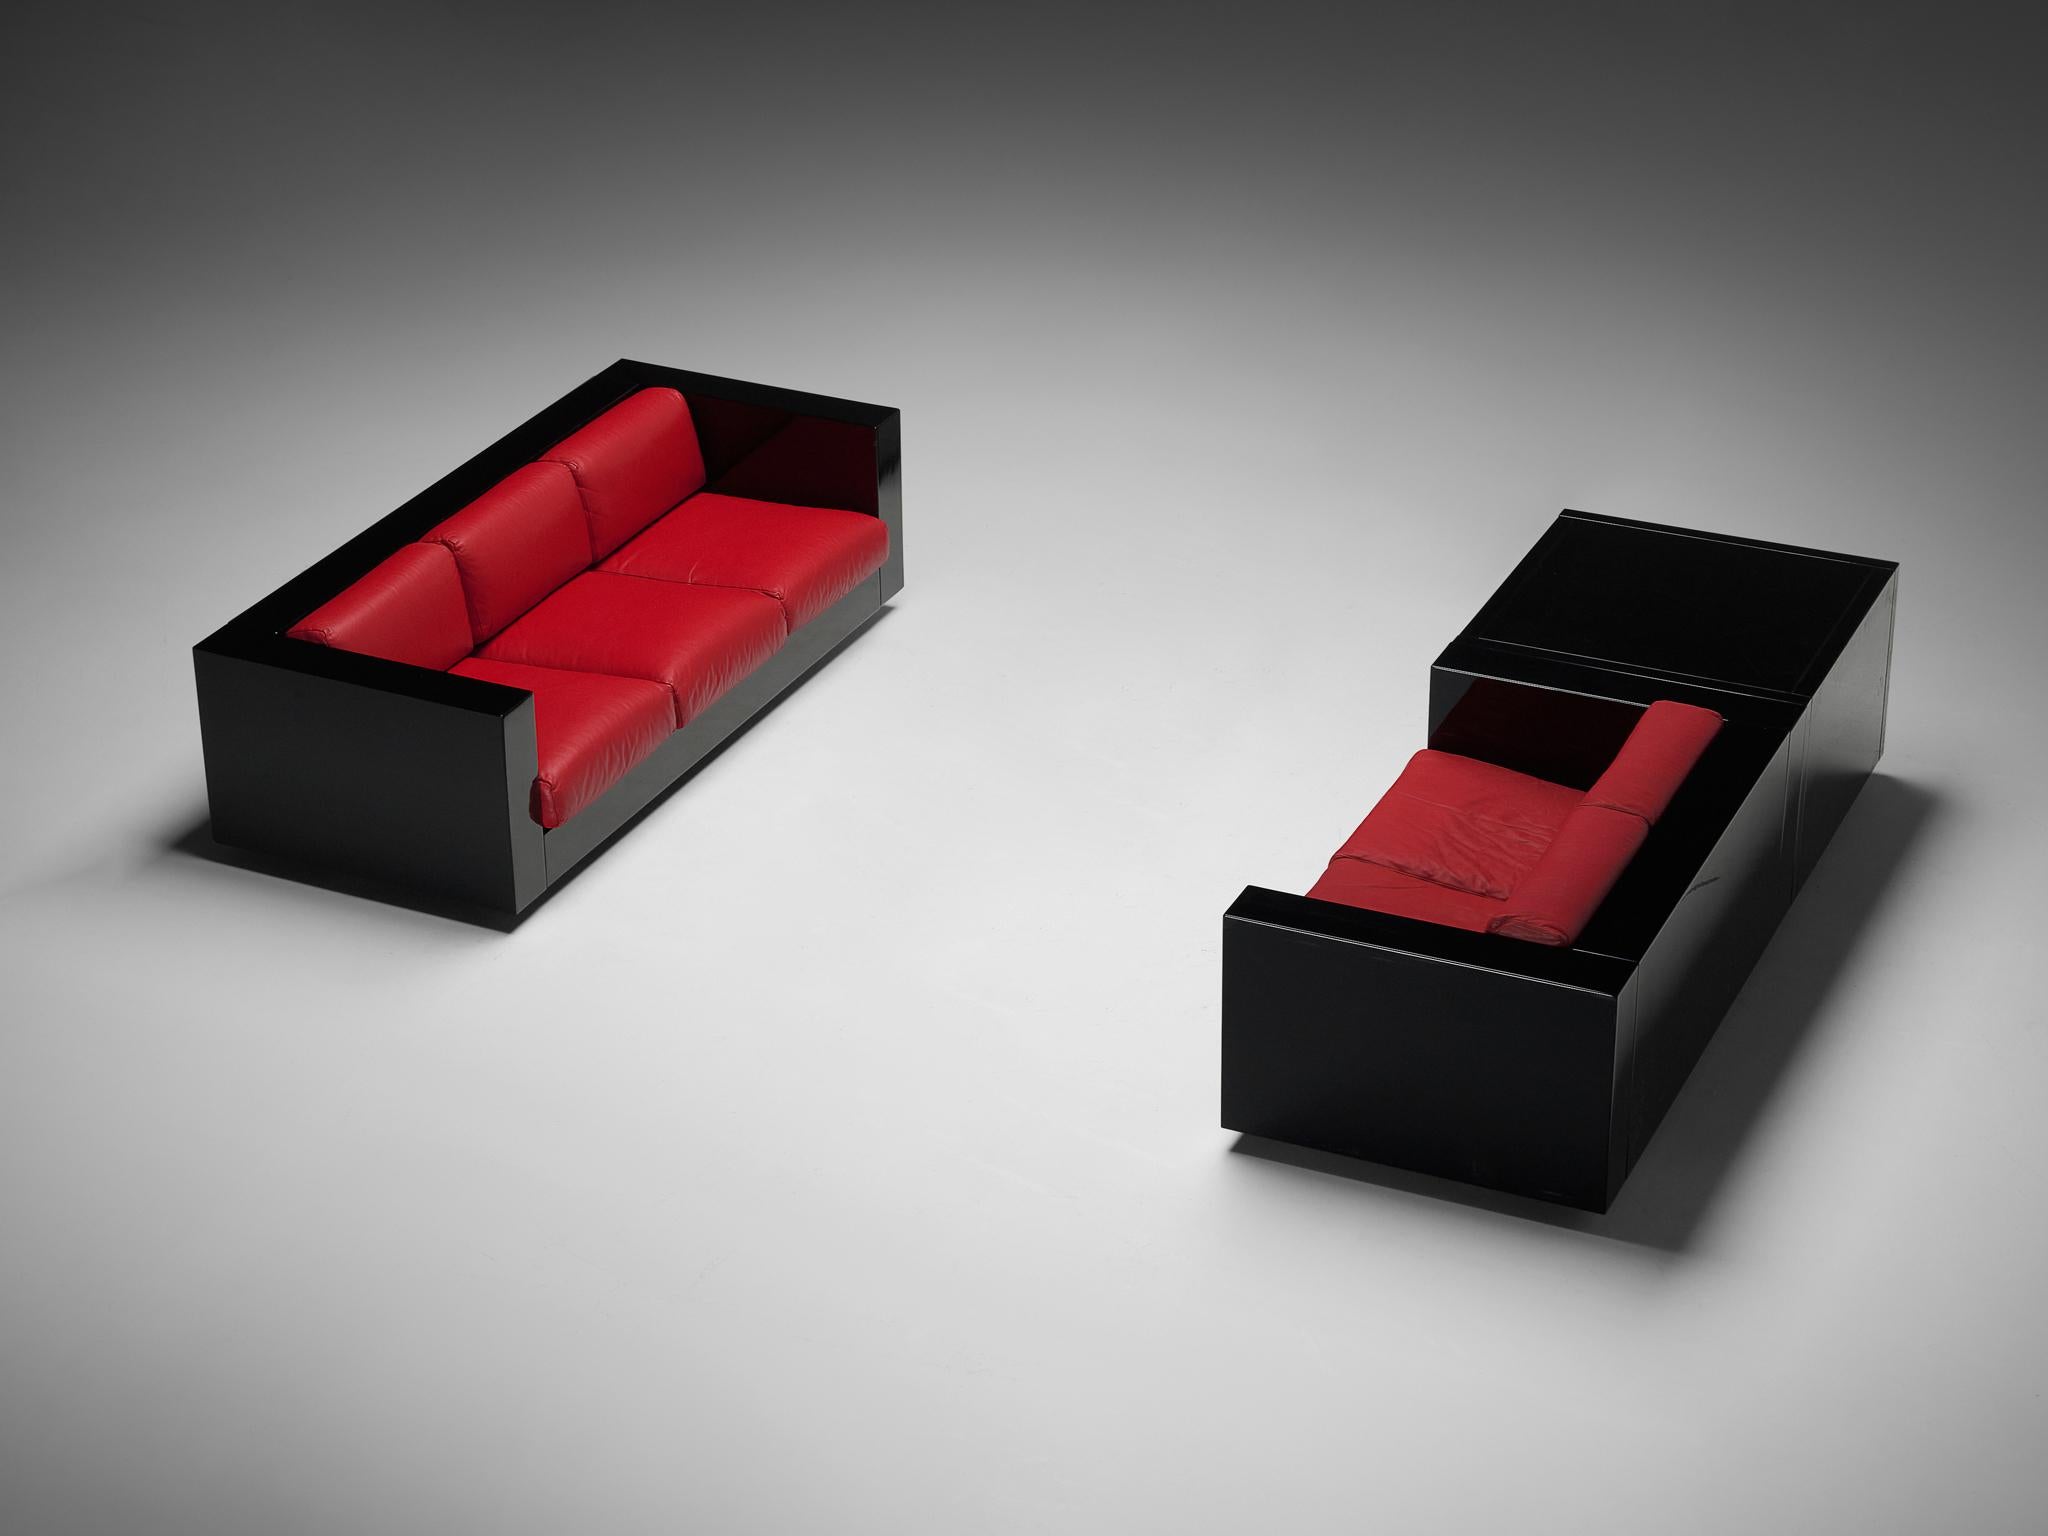 Massimo and Lella Vignelli for Poltronova 'Saratoga' living room set three-seat sofa, two-seat sofa, and cabinet, polyester lacquer and red leather, Italy, 1964.

Captivating lounge set or living room interior by Italian designer couple Lella &